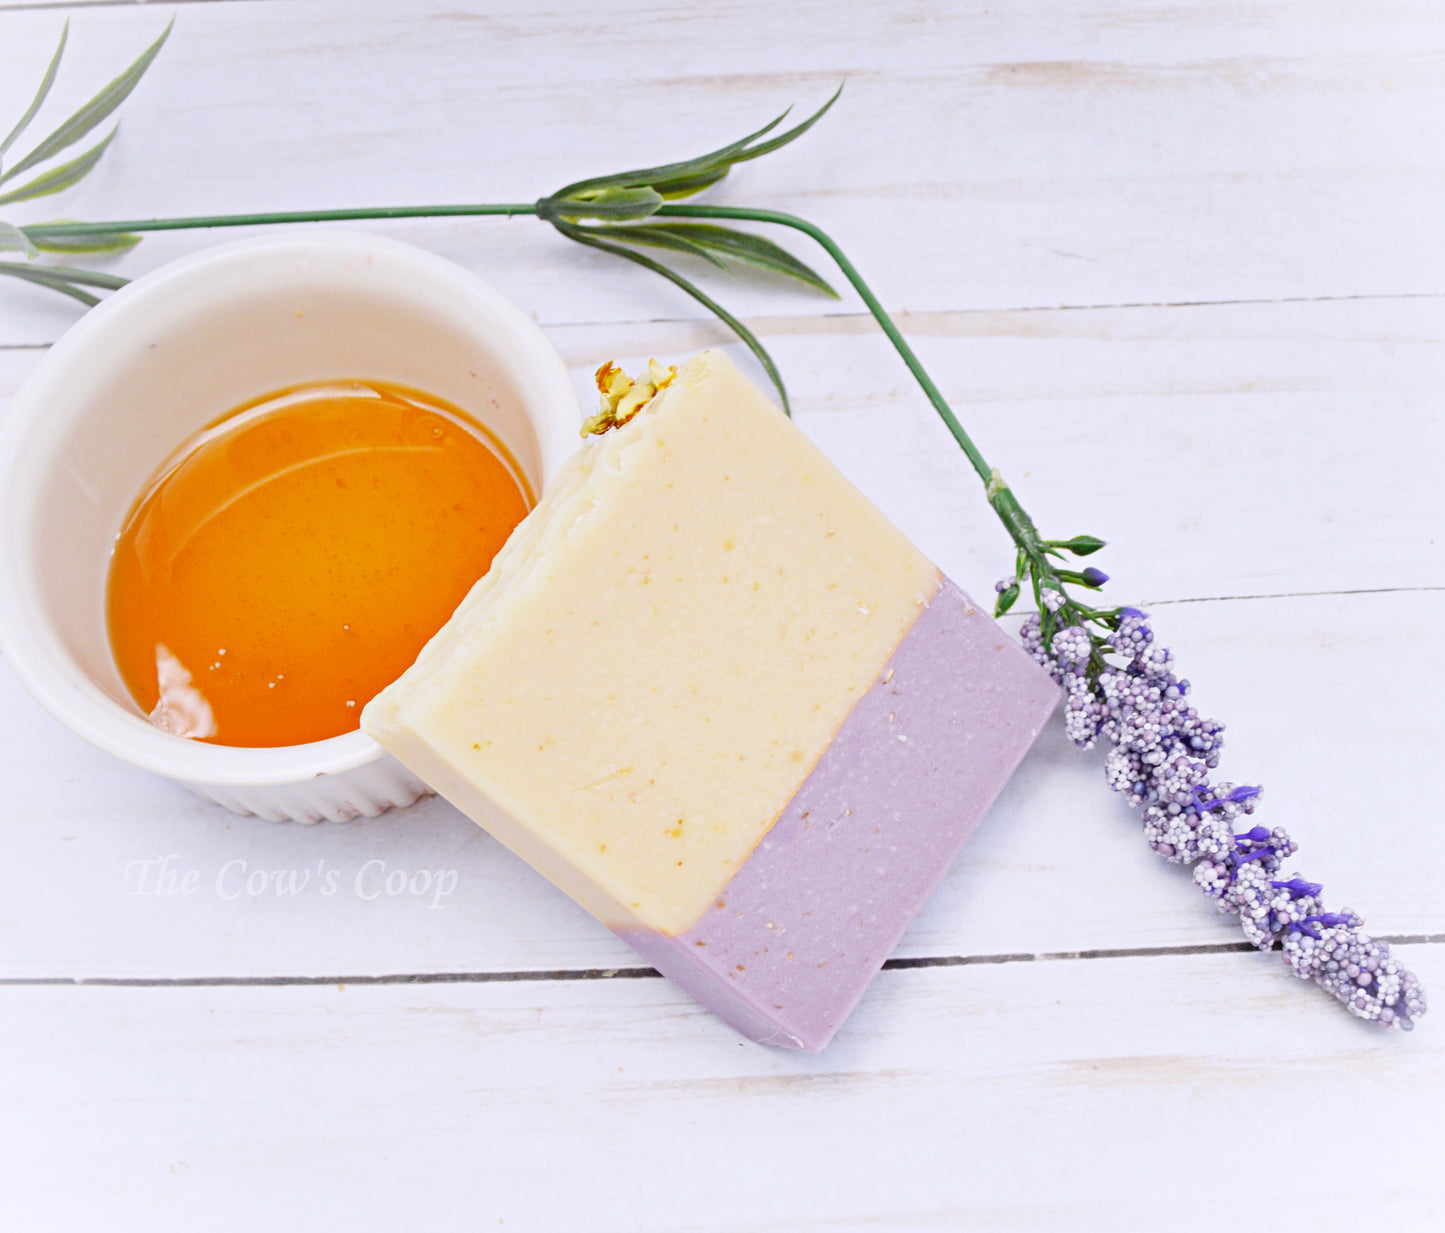 Lavender Bees - Cow and Goat Milk Soap